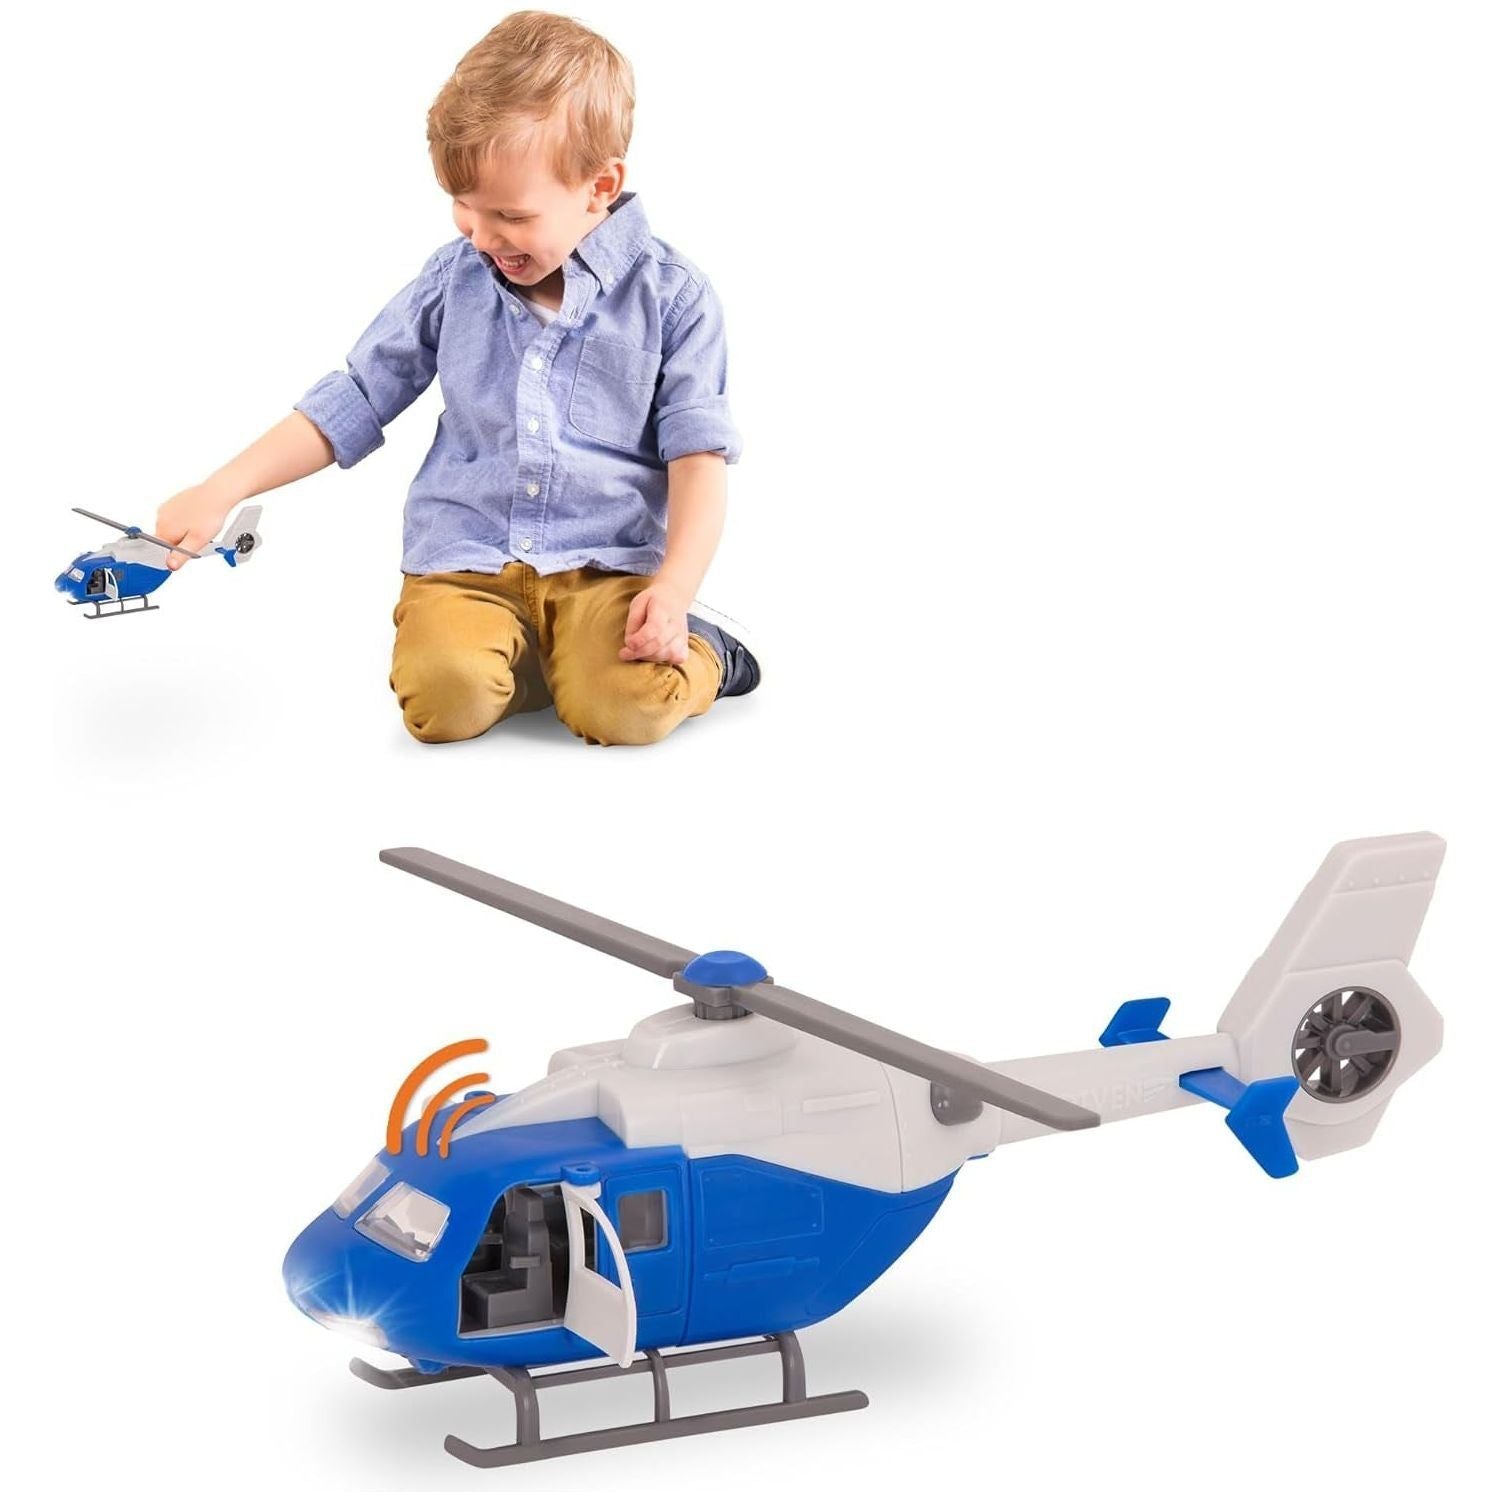 Helicopter Toy